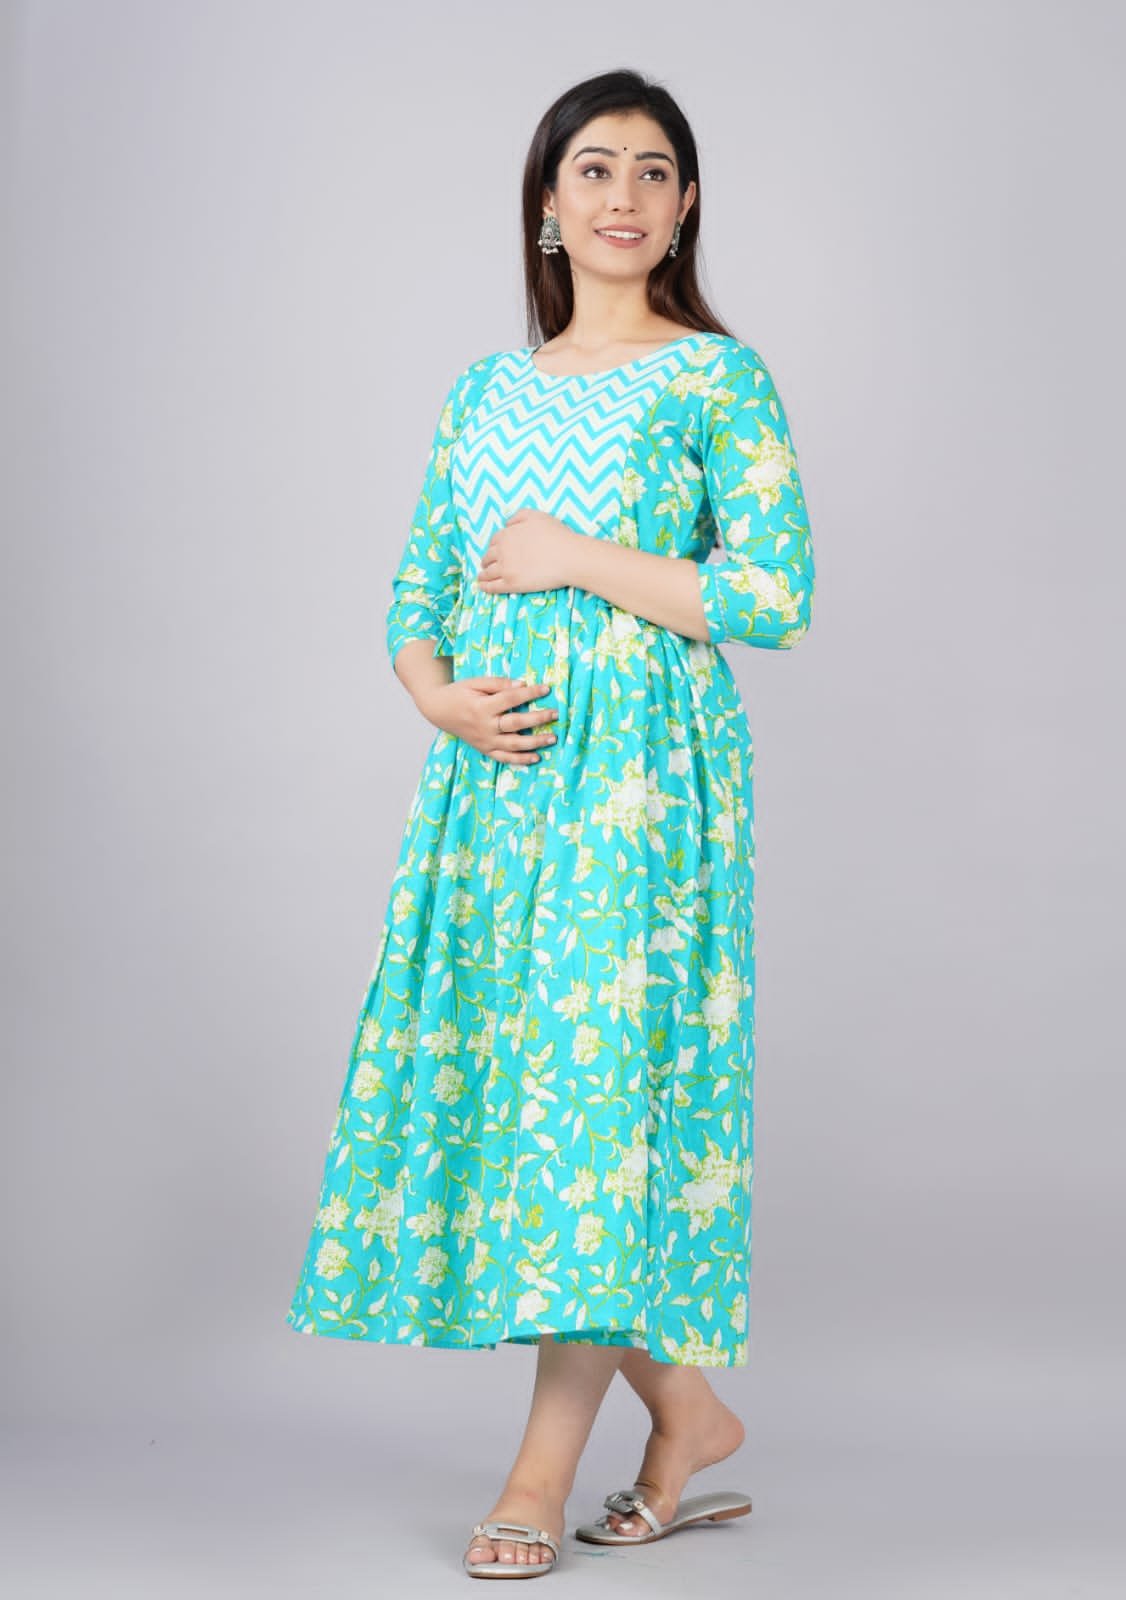 DUMMY SHAPE Women's Rayon Maternity Anarkali Kurti with Zipper, Feeding  Kurti for Pre and Post Pregnancy - Shop online at low price for DUMMY SHAPE  Women's Rayon Maternity Anarkali Kurti with Zipper,